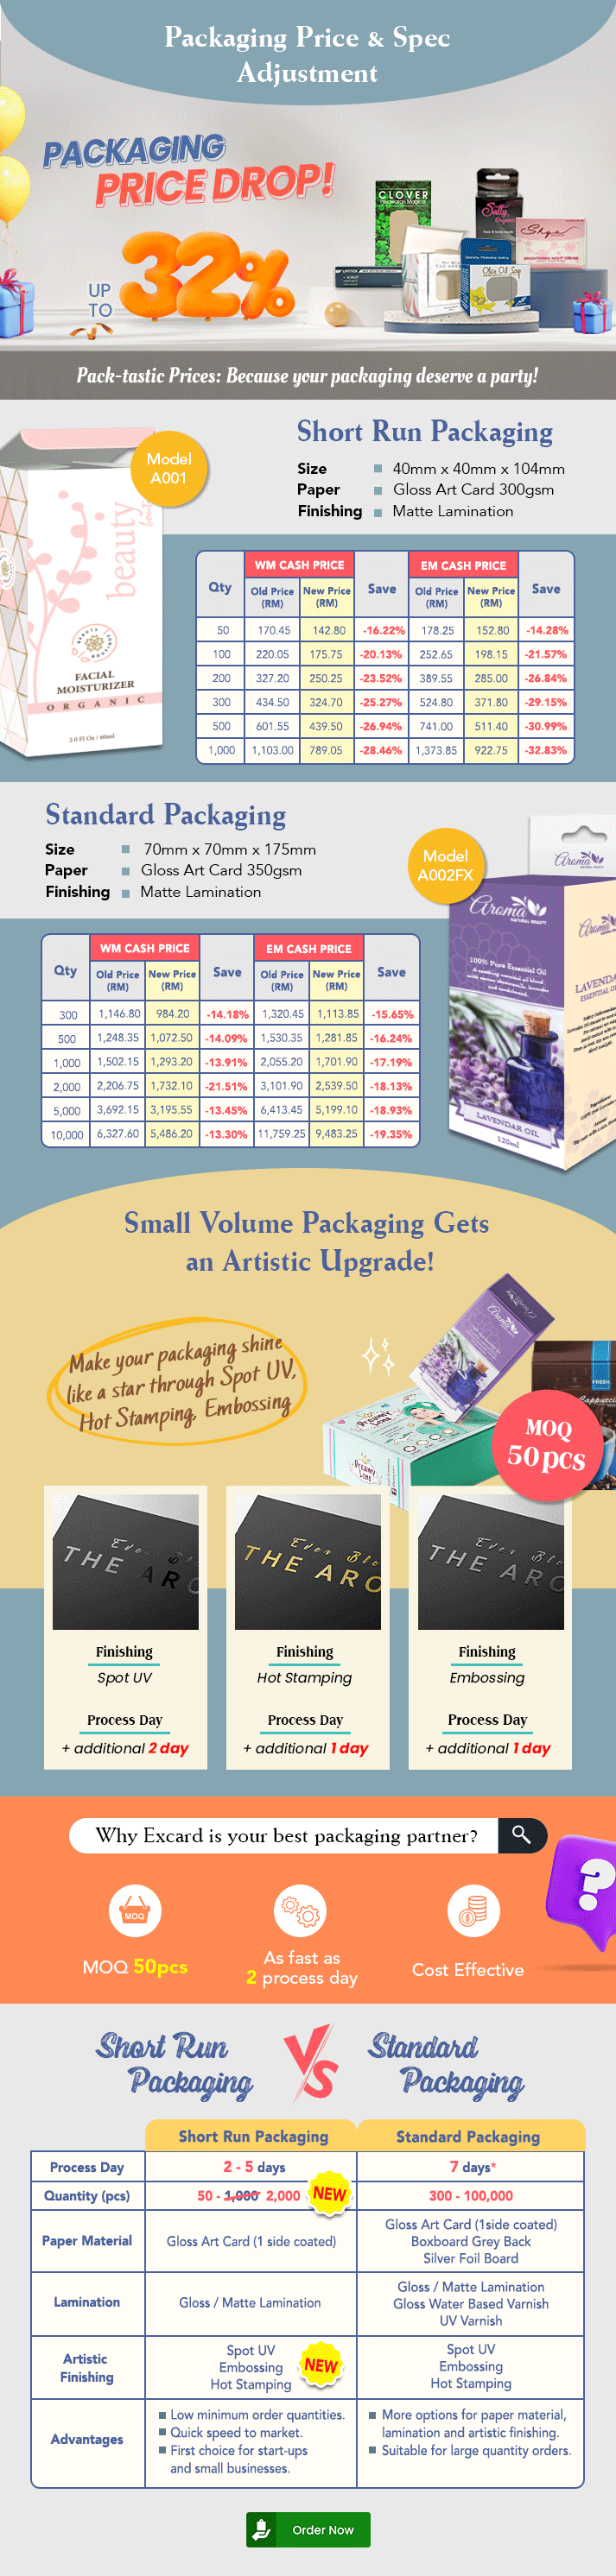 Packaging Price Drop up to 32%!